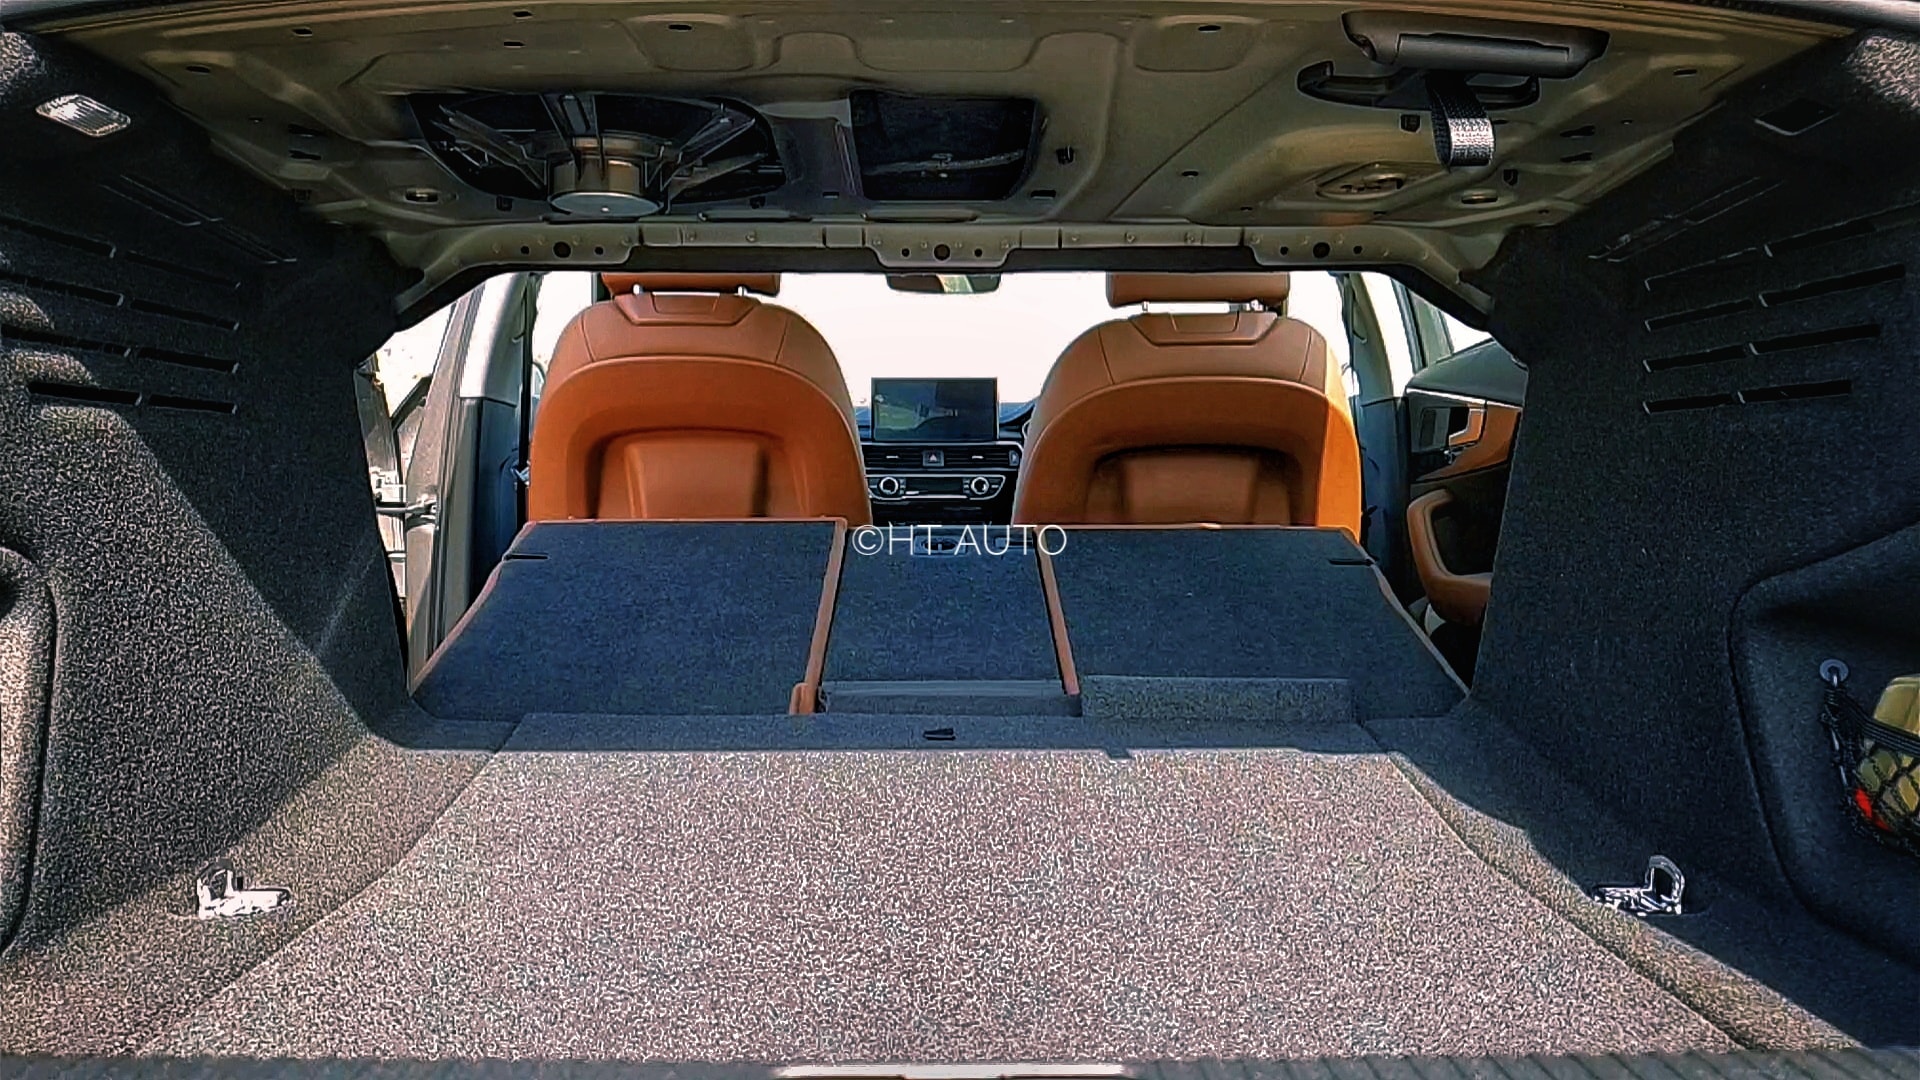 The rear seats can be folded together or in 60:40 ratio for more luggage storage options. (HT Auto/Sabyasachi Dasgupta)